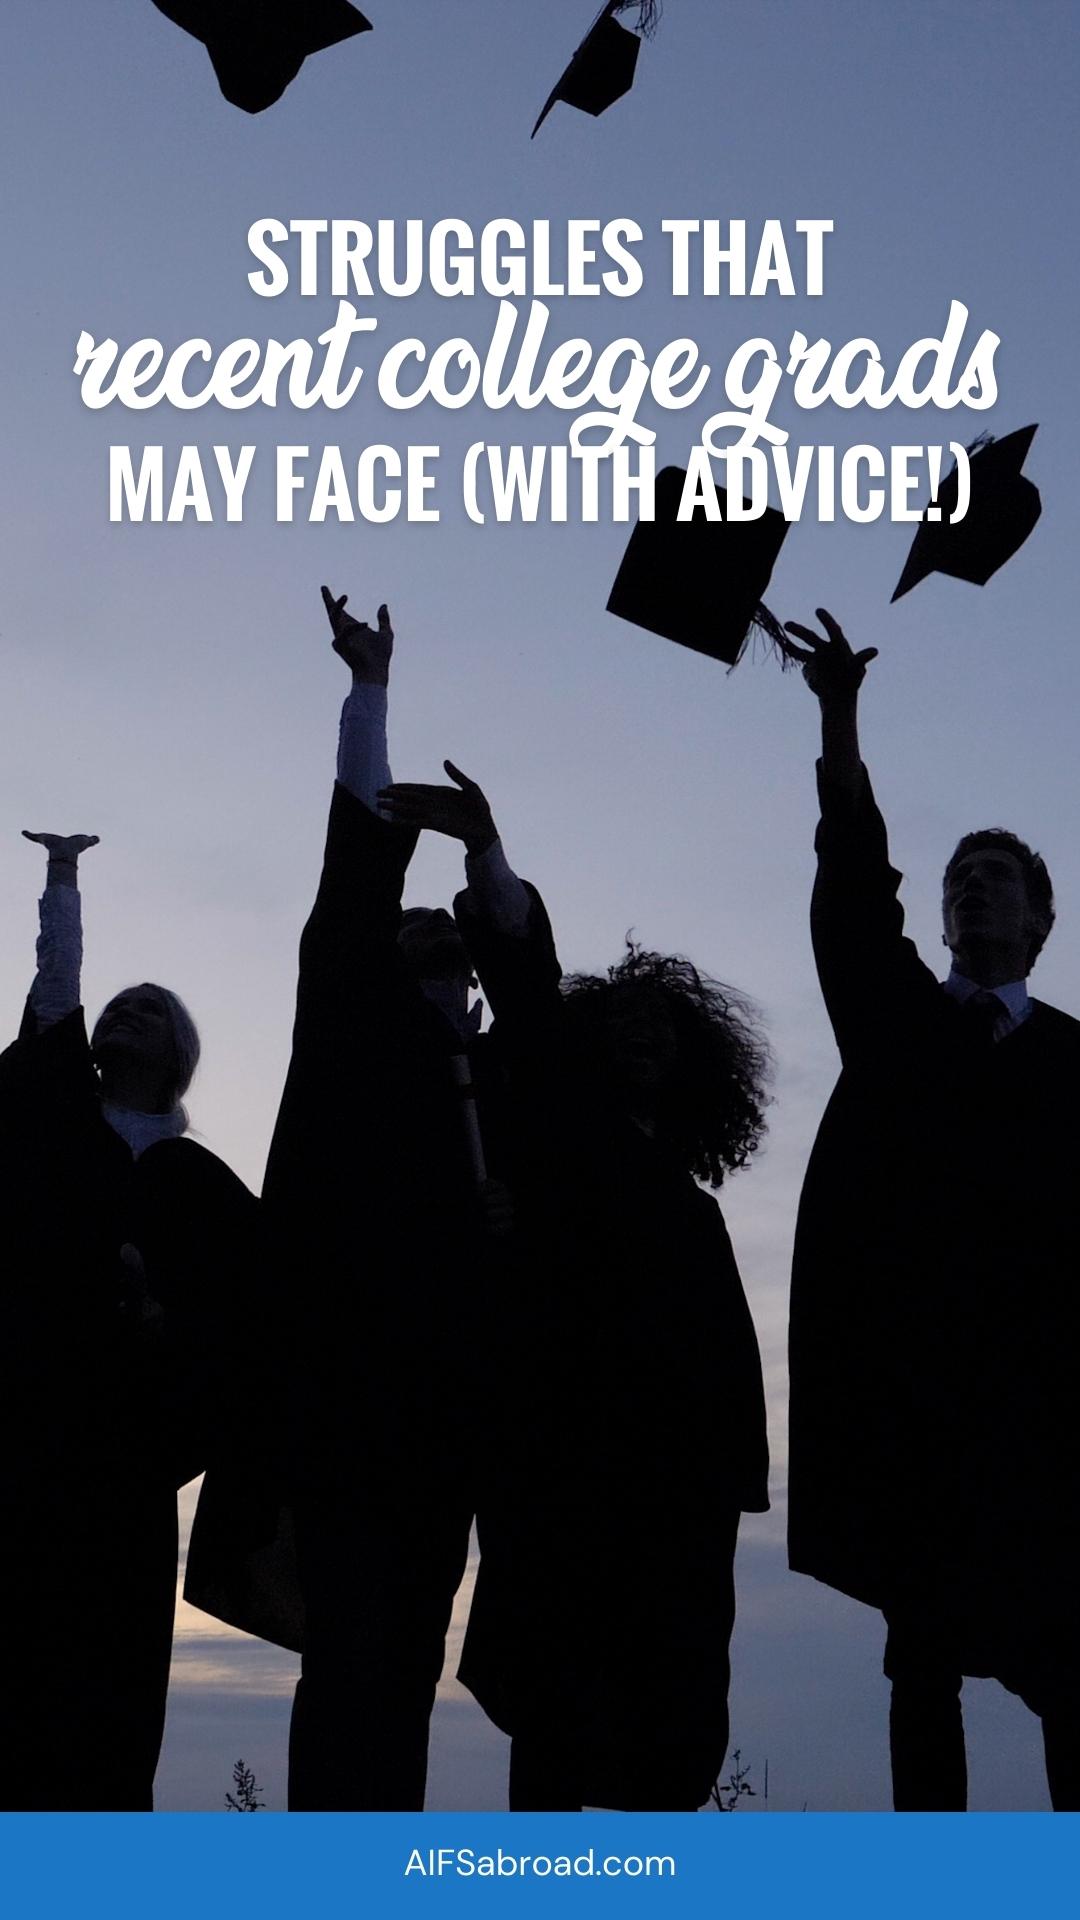 Pin image: Outline of 4 recent college graduates throwing graduation caps to celebrate with text "Struggles That Recent College Graduates May Face (with Advice!")